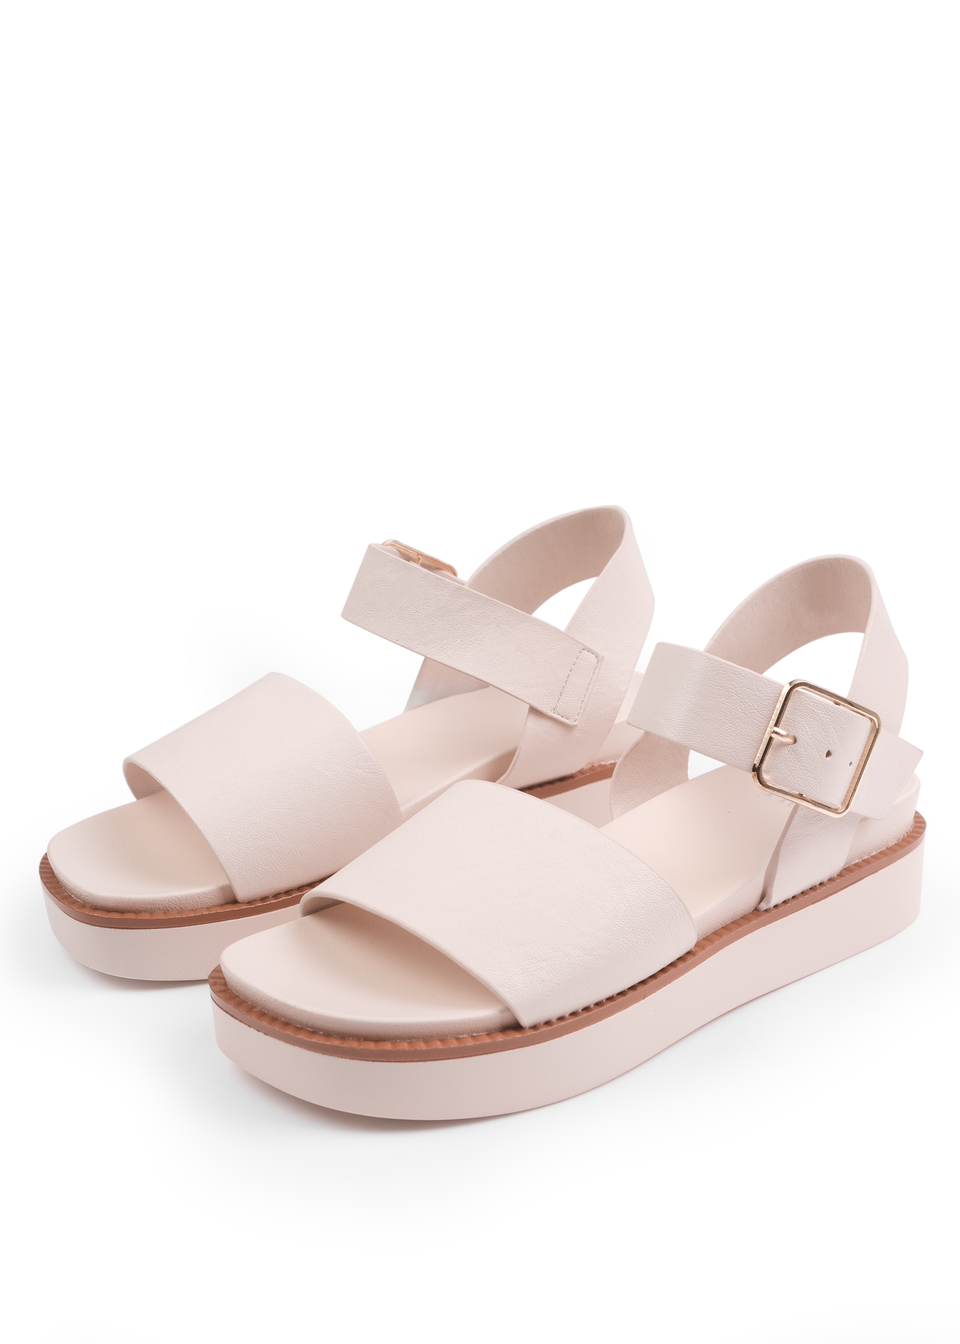 Where's That From Cream Phoenix Wide Fit PU Flat Sandals